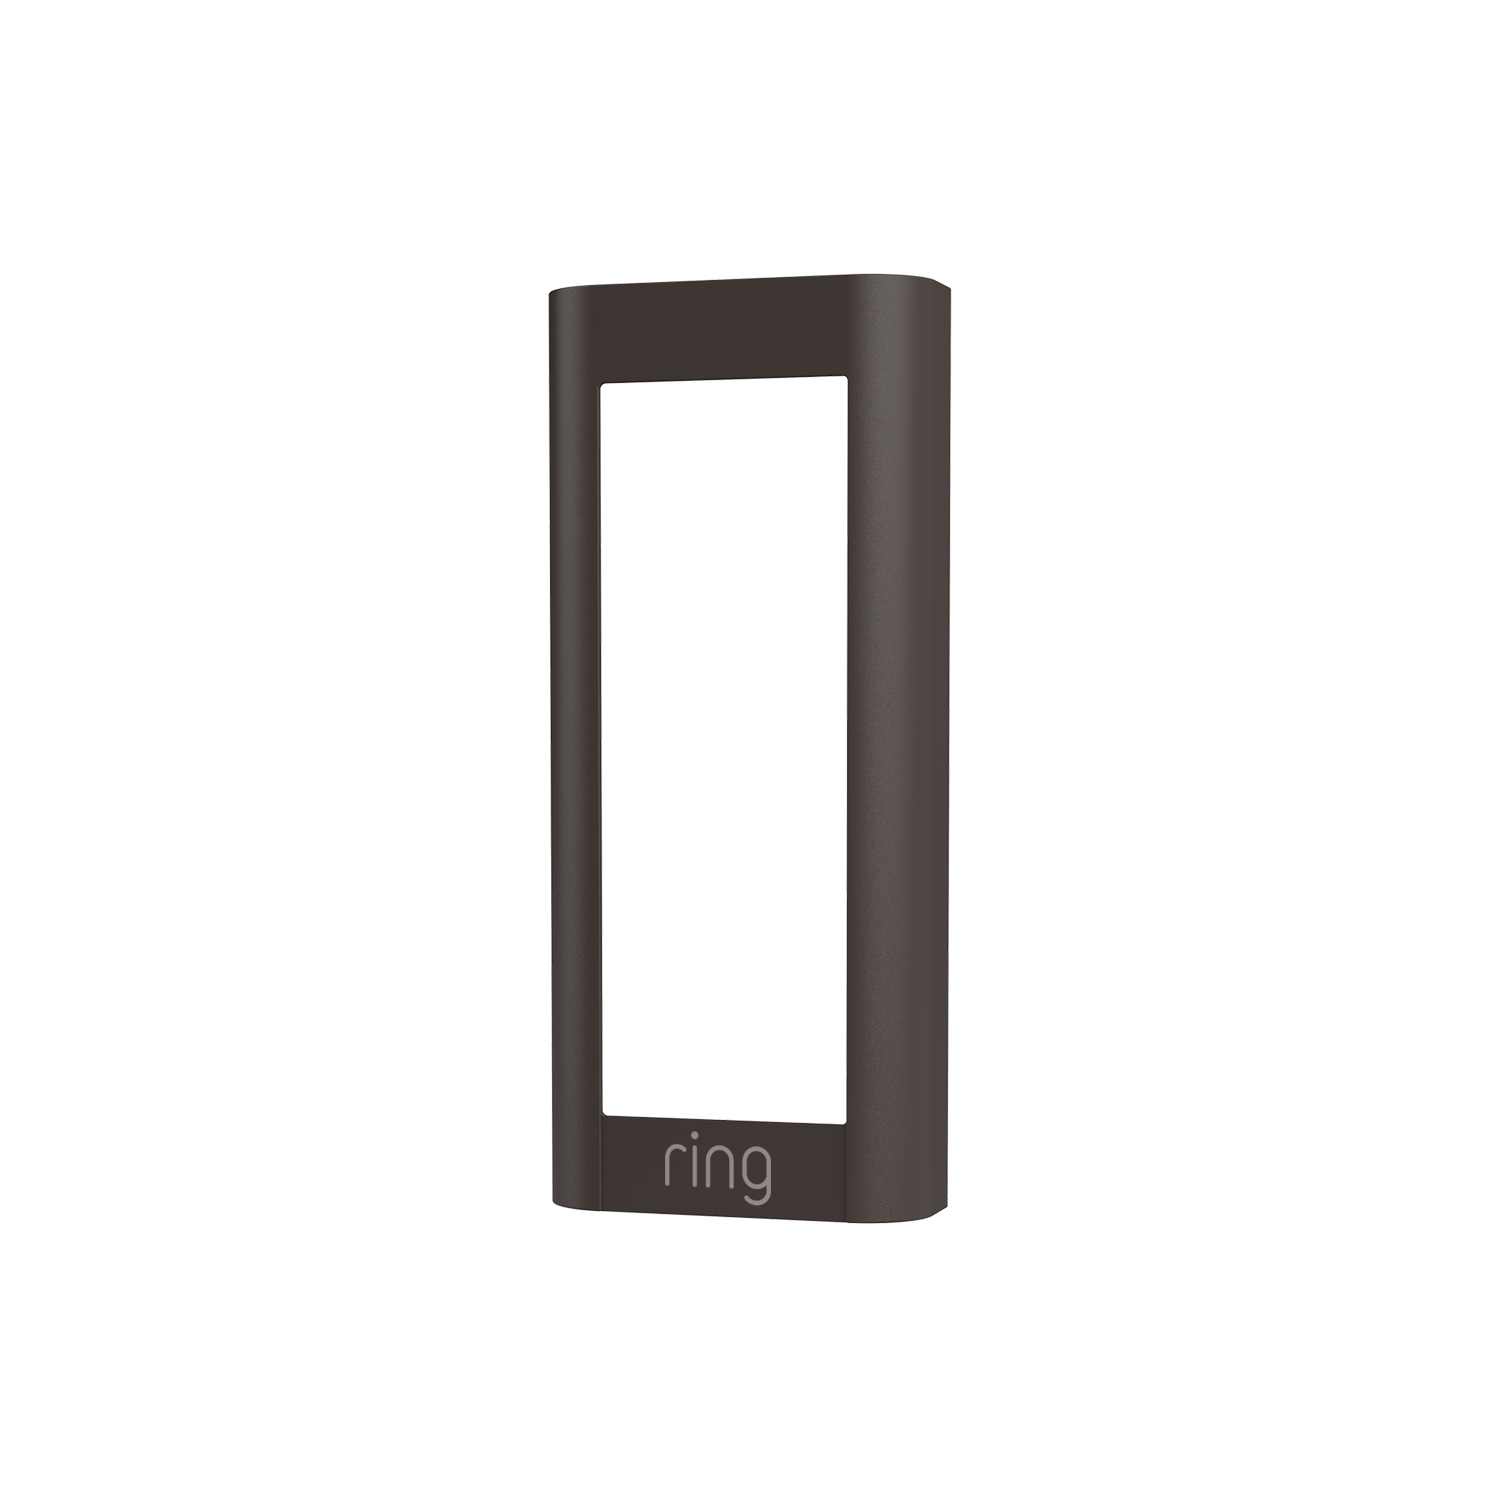 Interchangeable Faceplate (for Wired Video Doorbell Pro (Video Doorbell Pro 2)) - Mocha Brown:Interchangeable Faceplate (for Video Doorbell Pro 2)